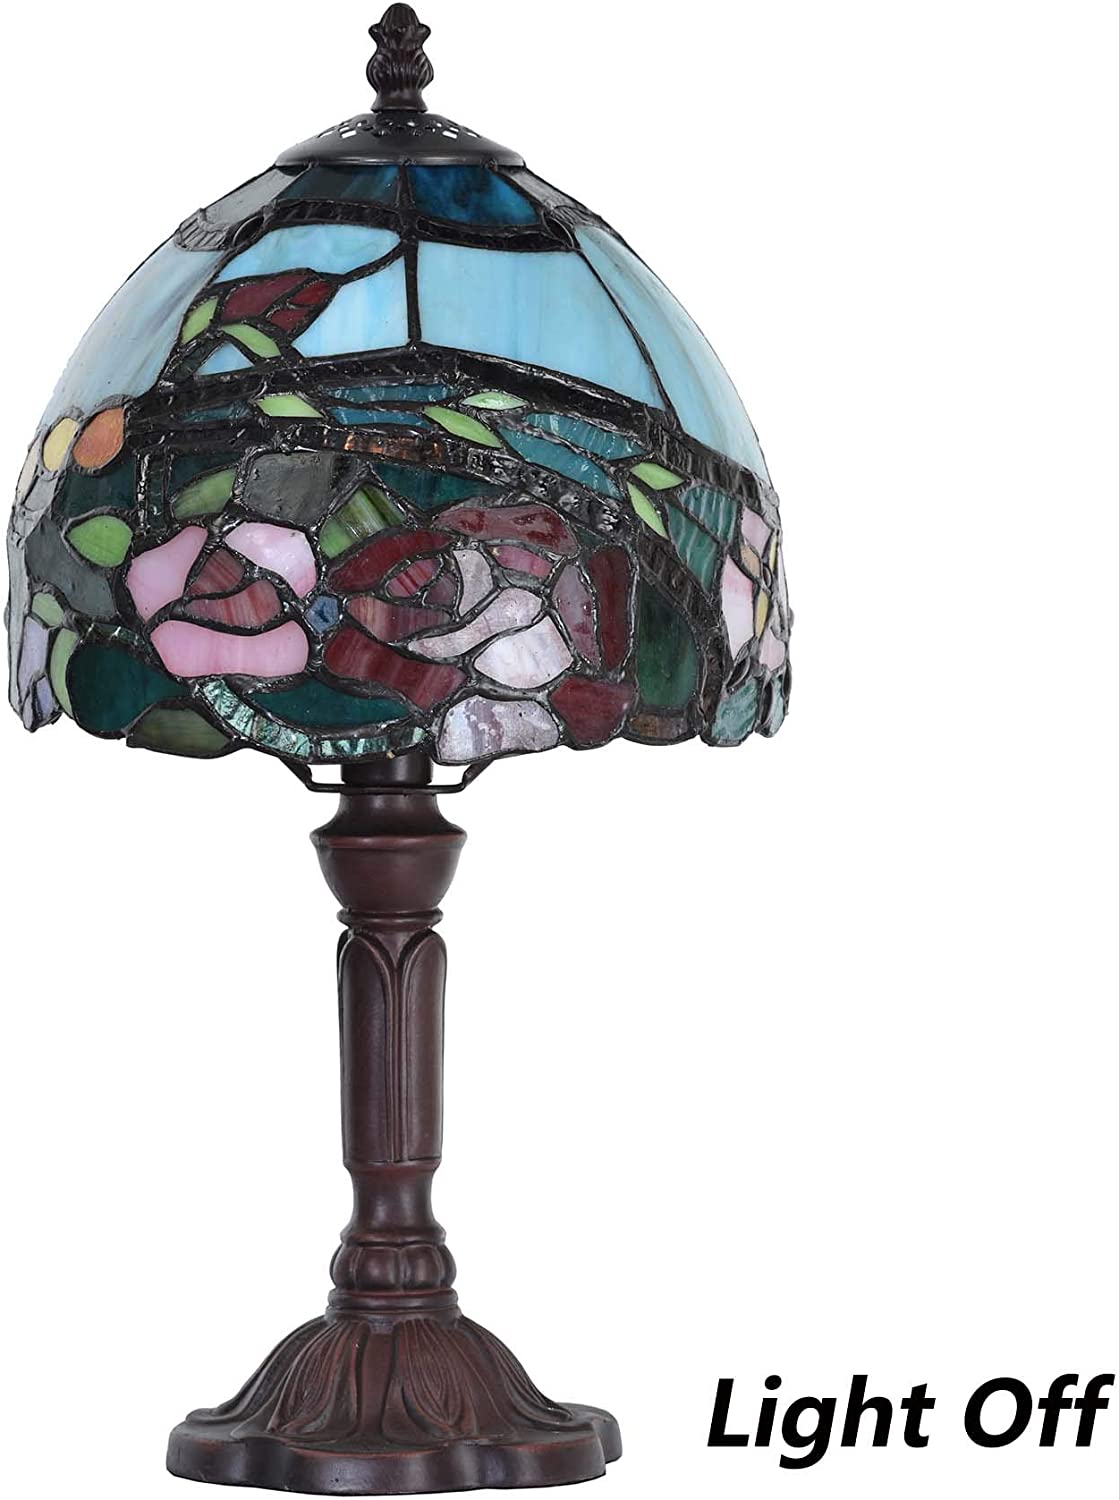 SHADY L10736 Rose Flower  Style Stained Glass Table Lamp with 8-inch Wide Lampshade  15-inch Tall  Red